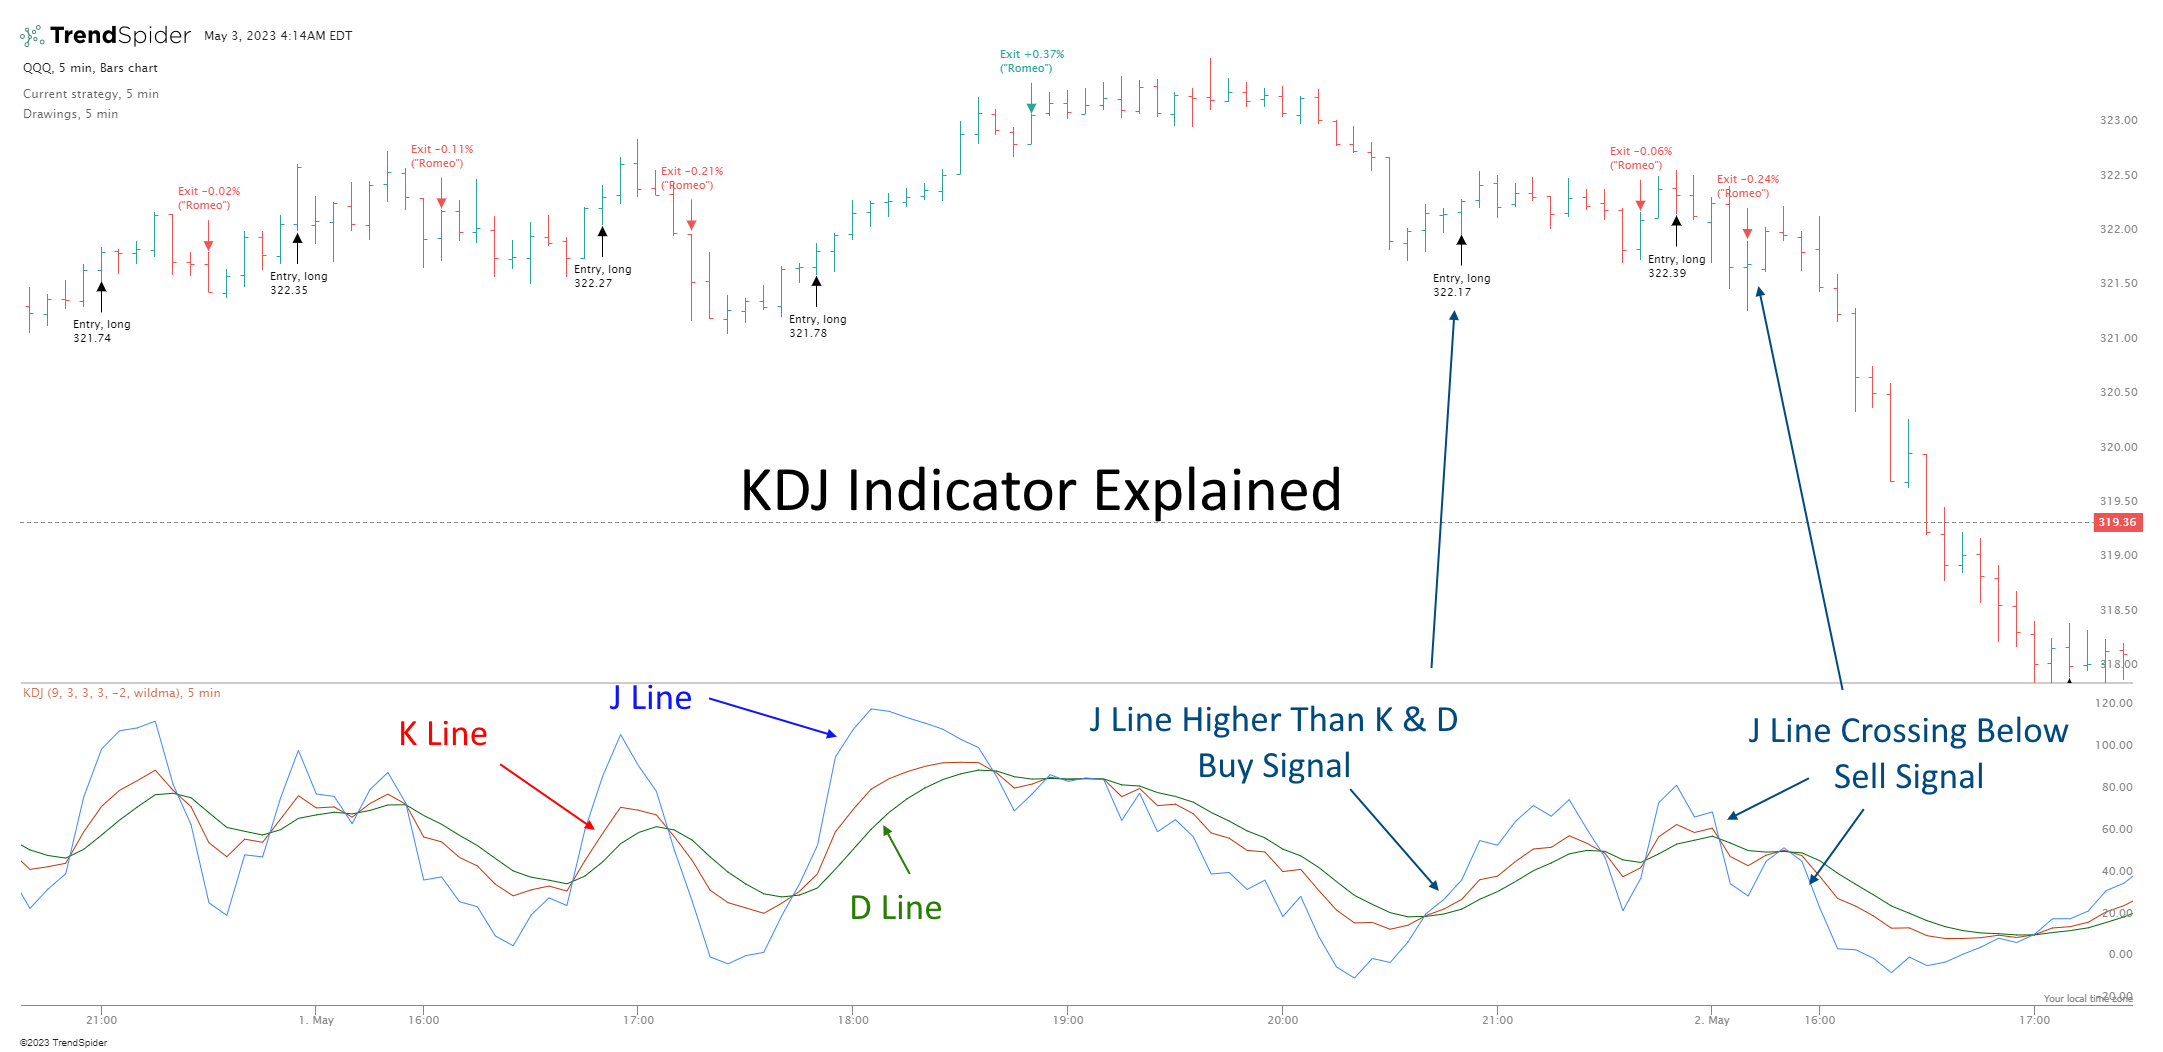 The KDJ Indicator Explained: K, D, & J Lines + Buy and Sell Signals